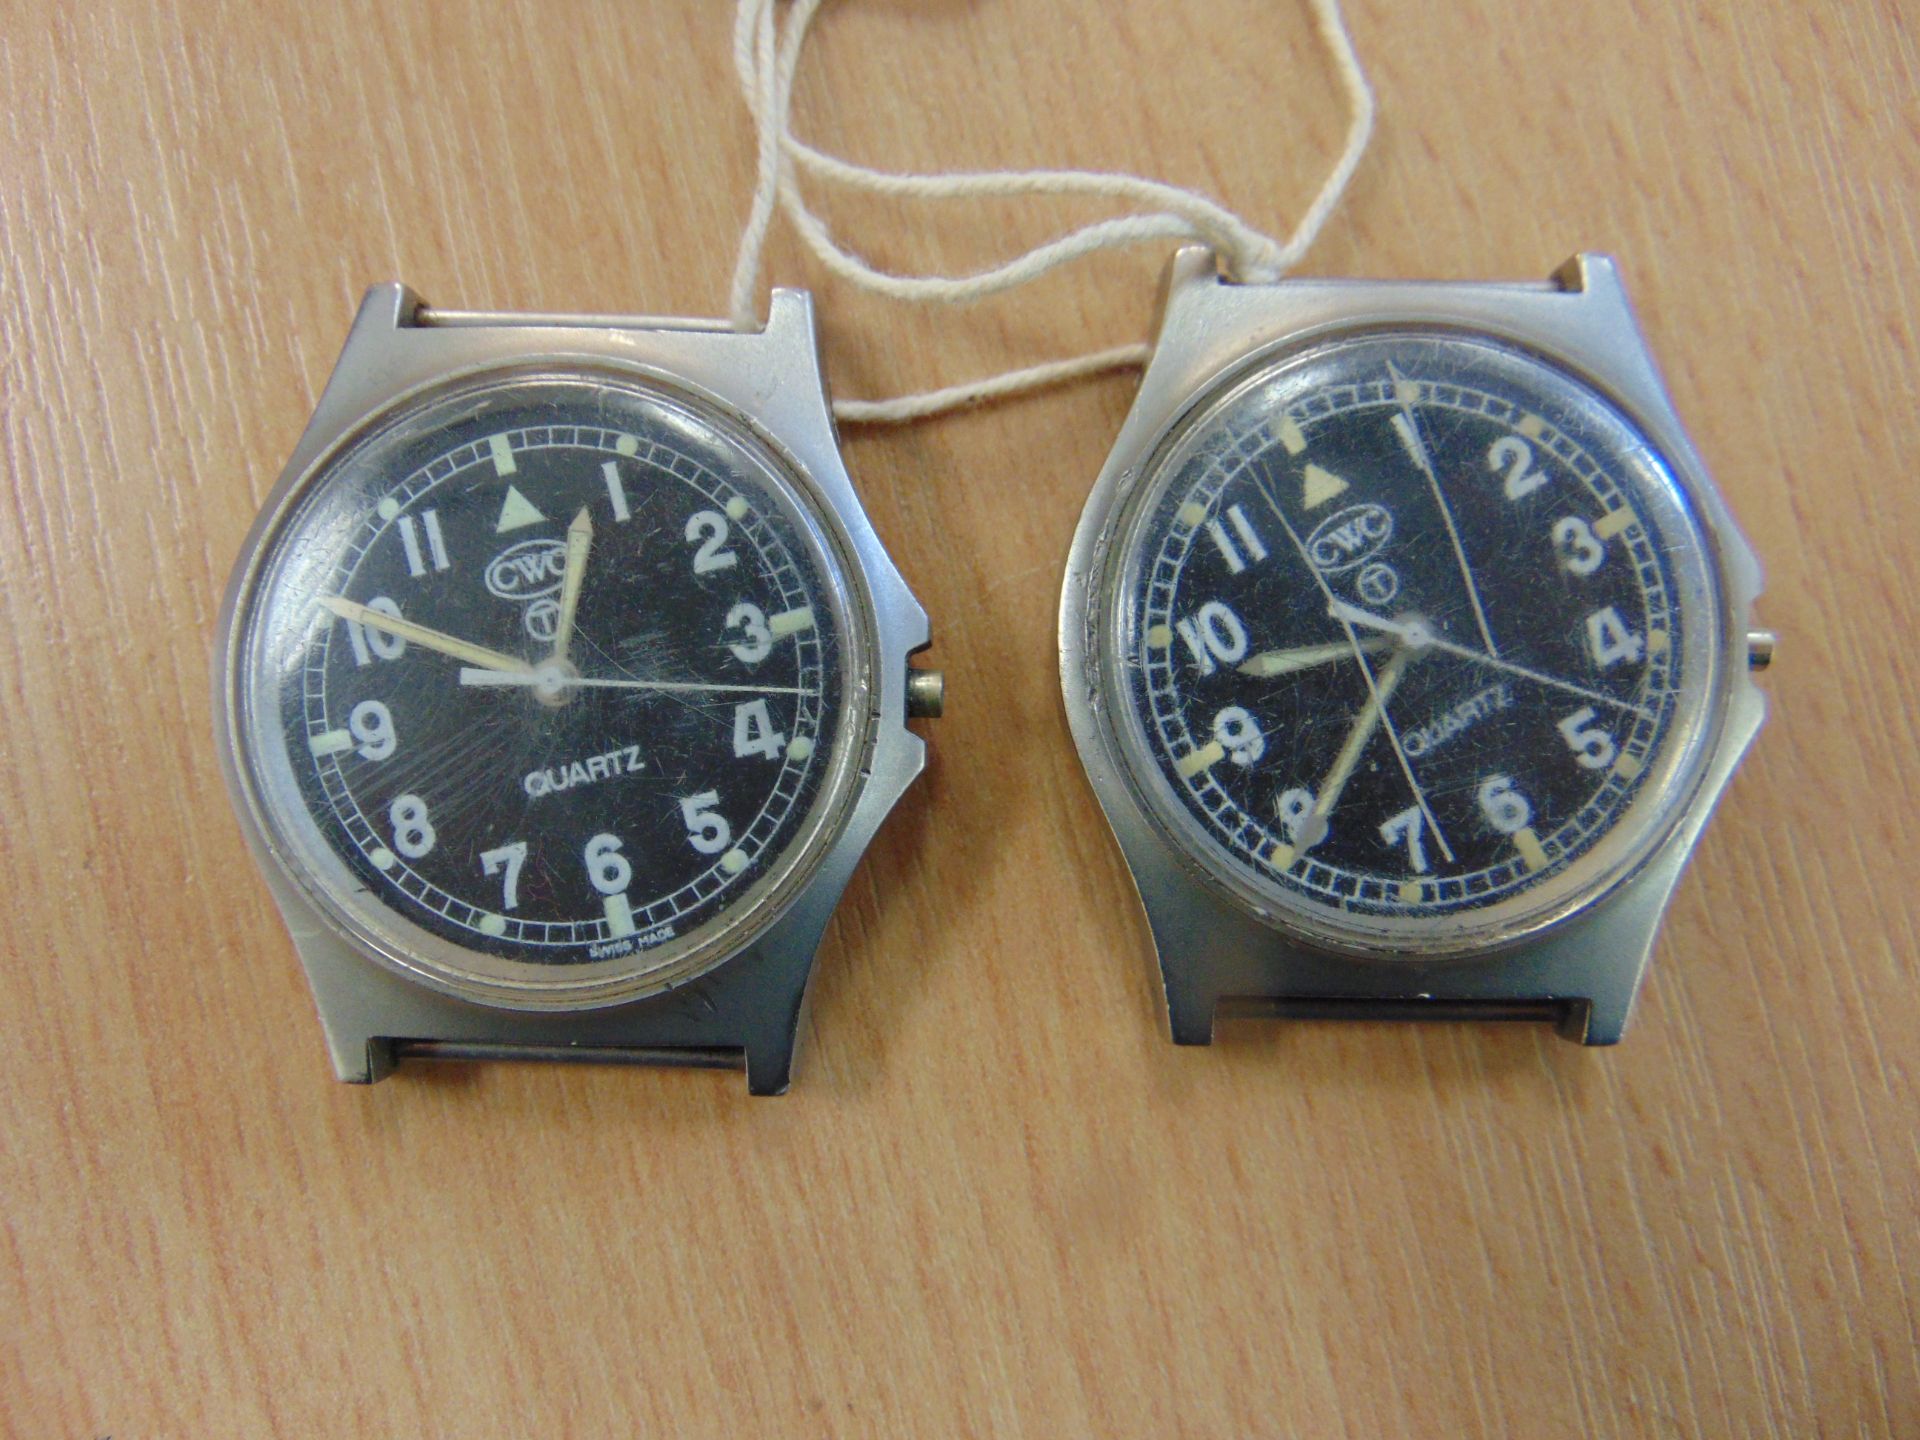 2X CWC 0552 ROYAL MARINES ISSUE SERVICE WATCHES NATO MARKED DATE: 1988/89 - SPARES/ REPAIR - Image 2 of 9